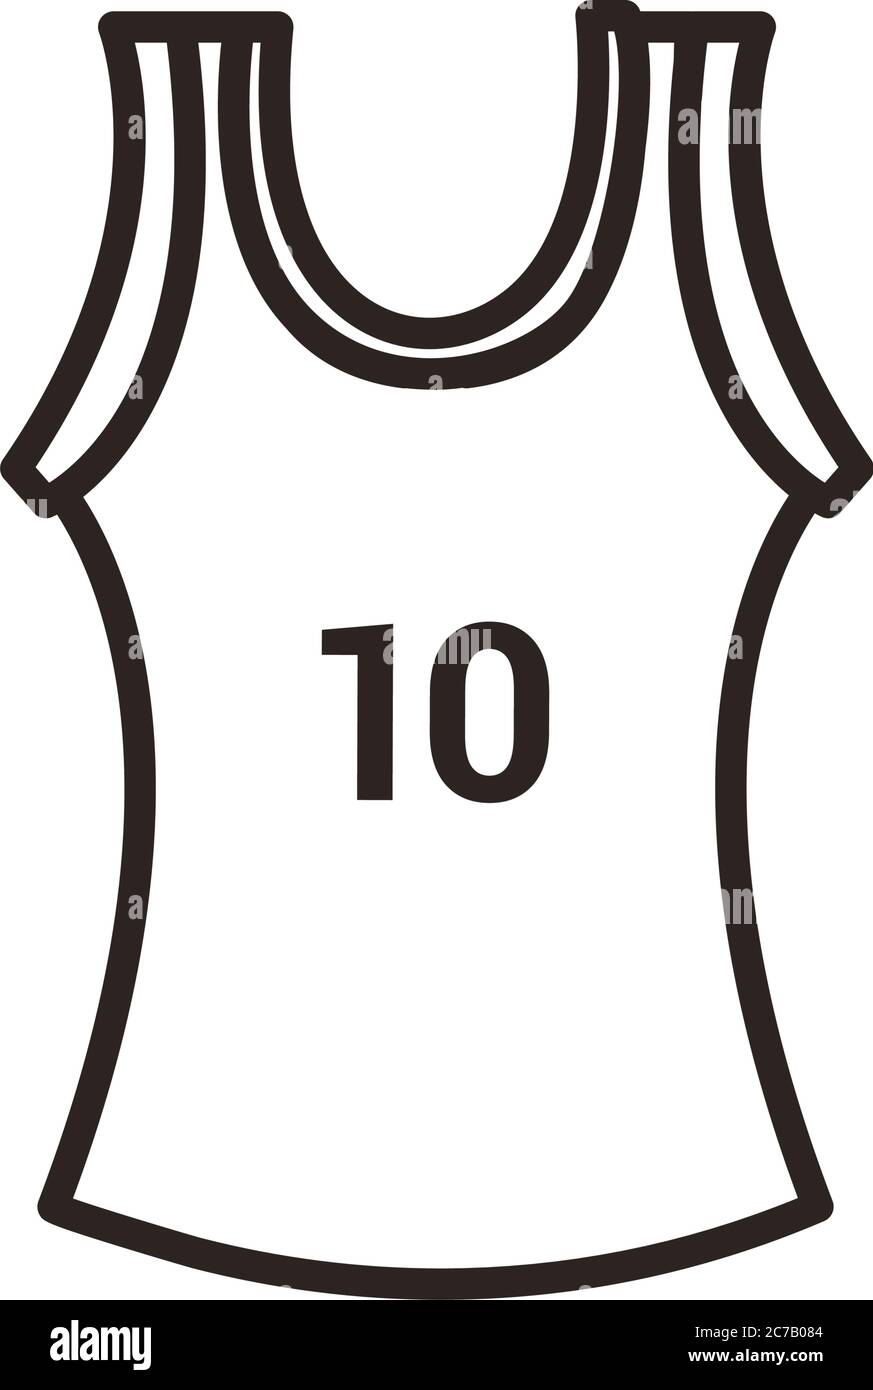 Catcher - Free sports and competition icons